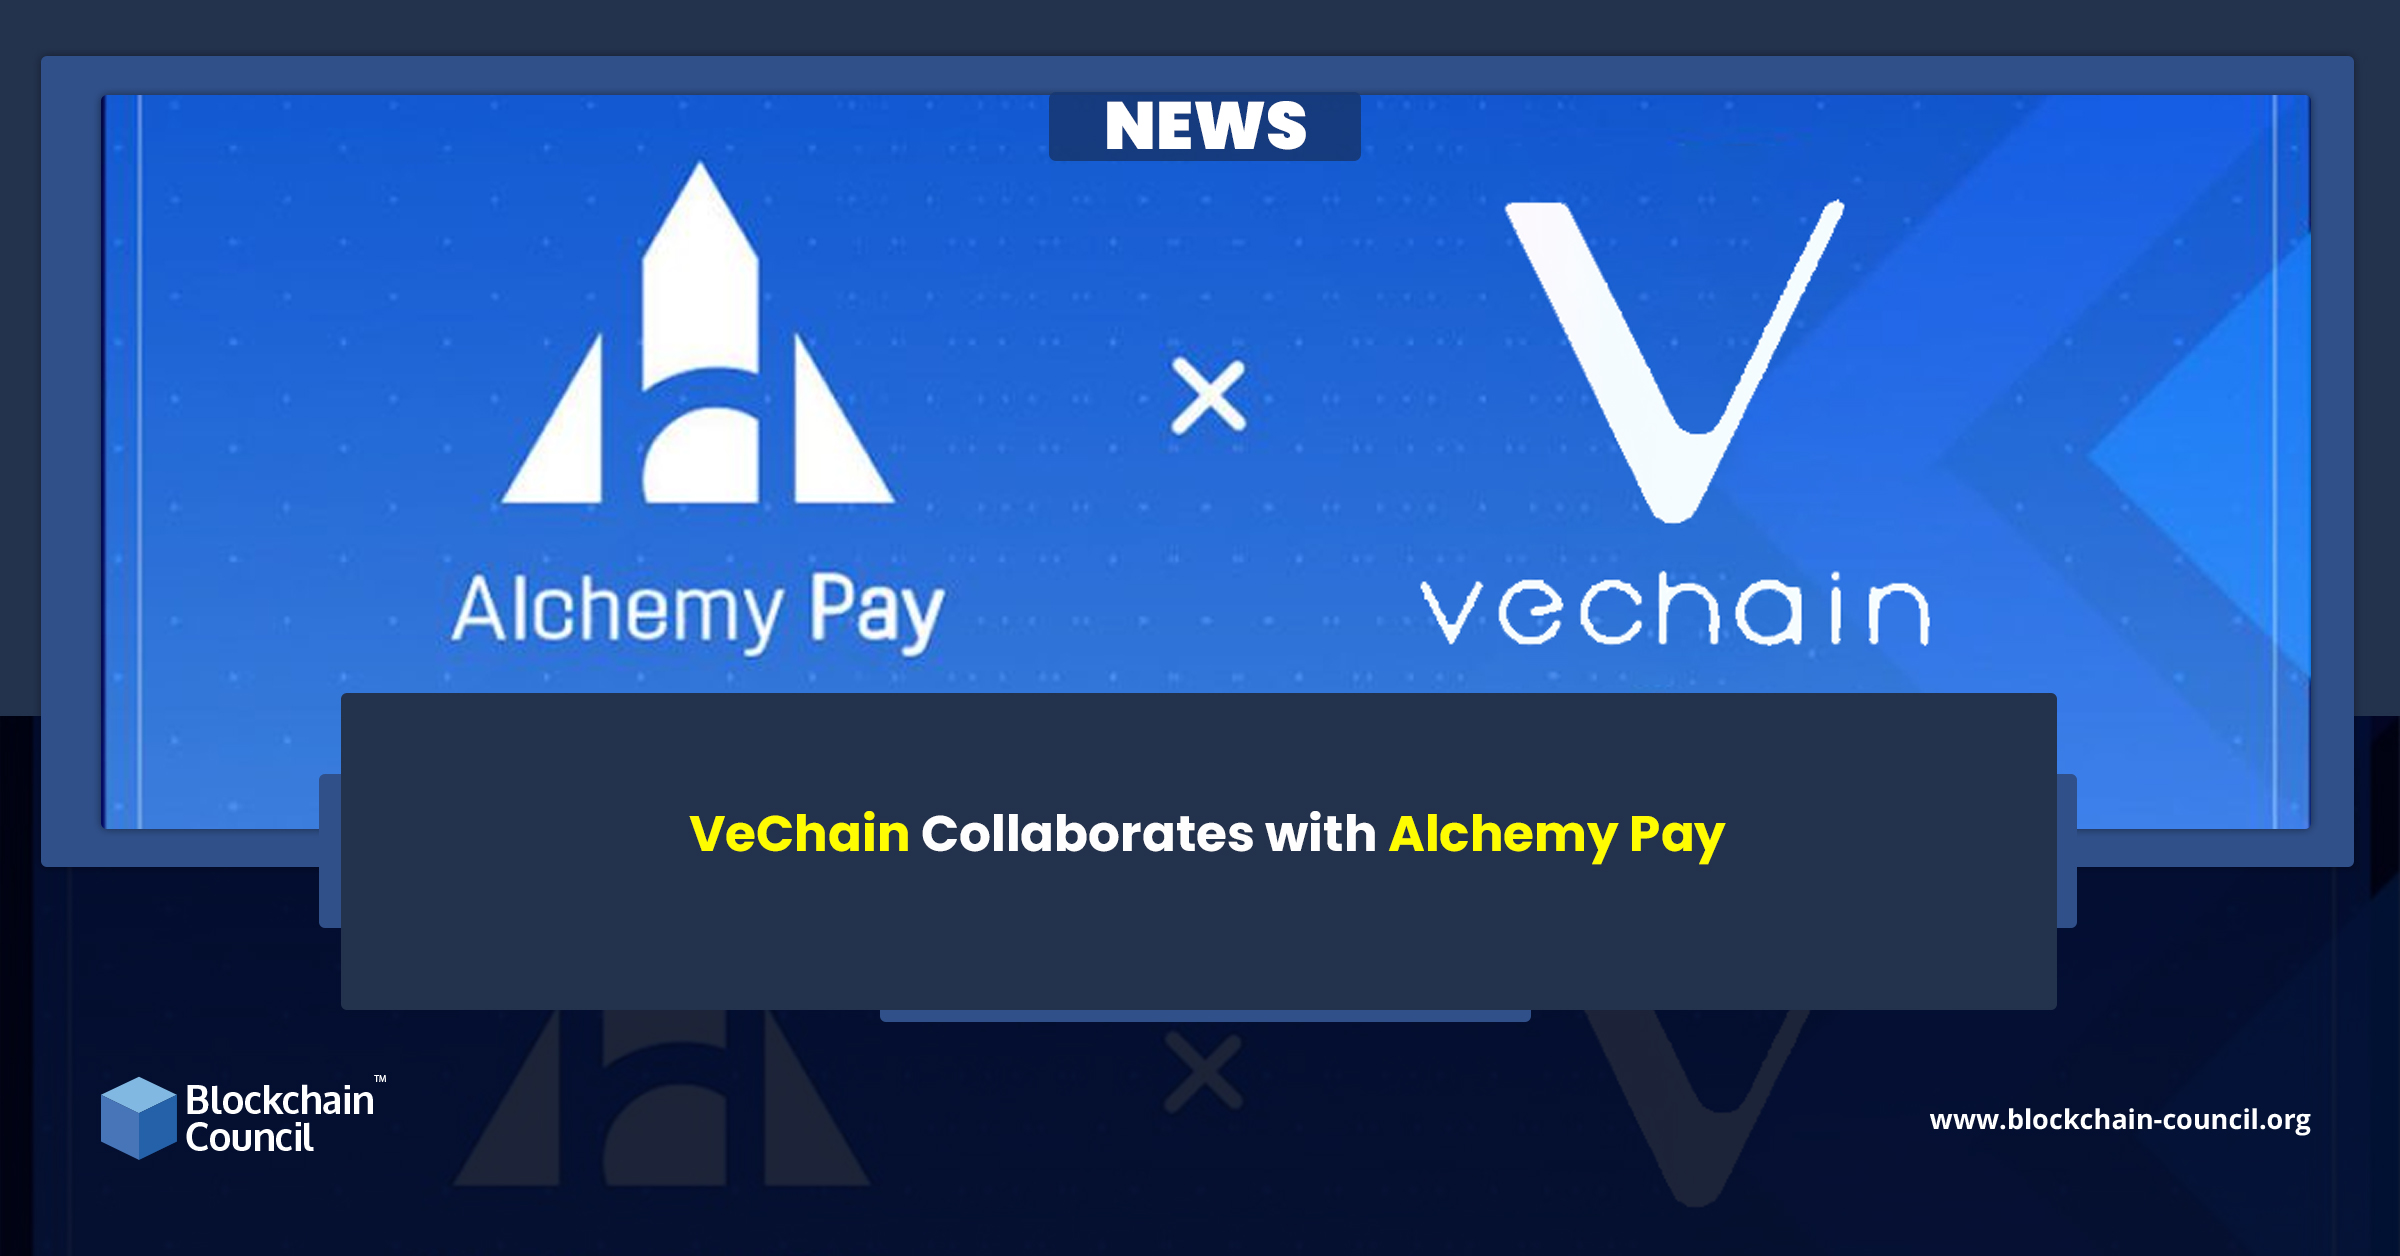 VeChain Collaborates with Alchemy Pay